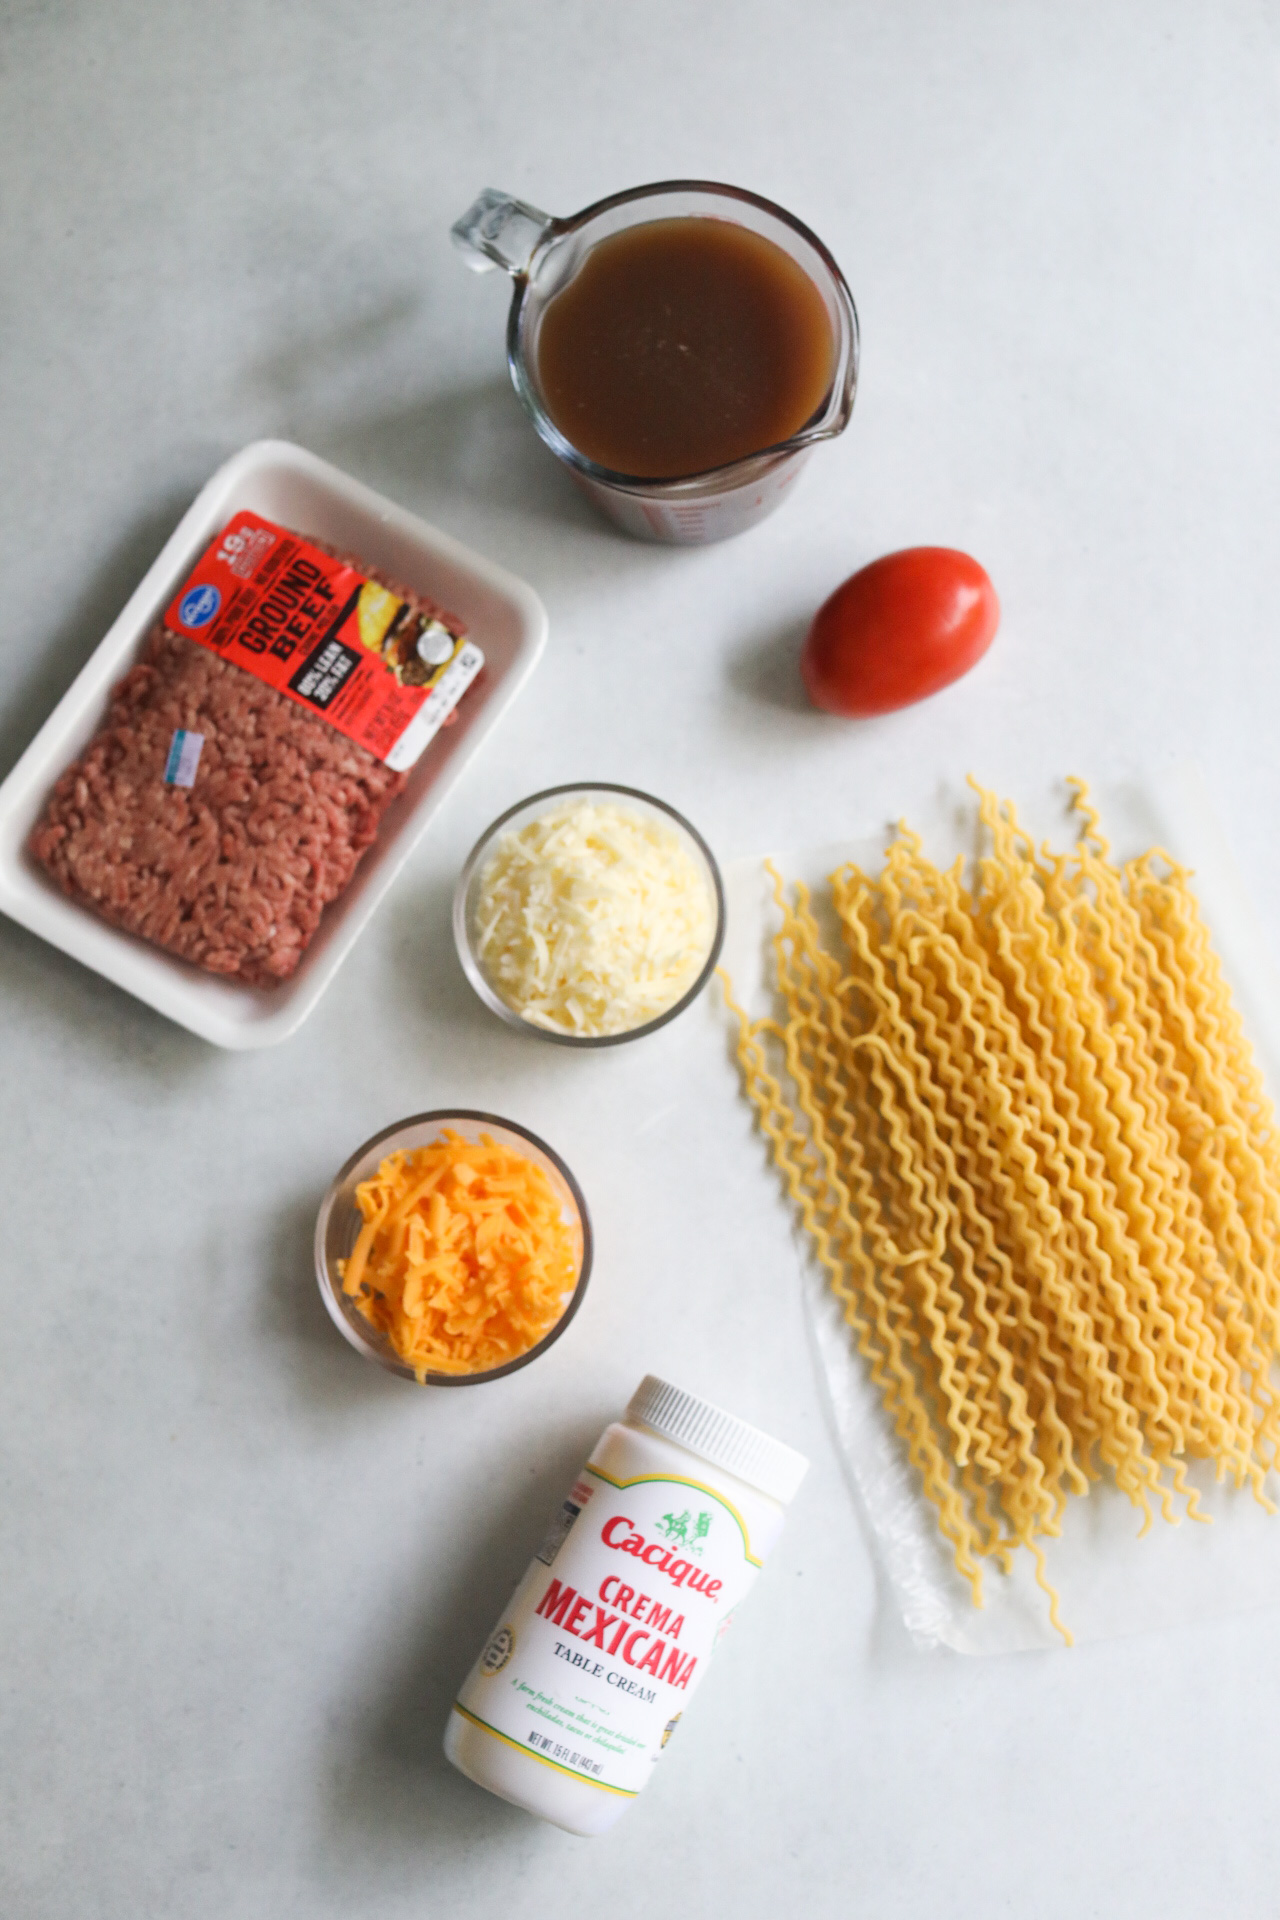 One pot taco spaghetti ingredients flat lay for additional ingredients. Packaged ground beef, beef stock in a measuring glass, roma tomato, two bowls with cheddar and Monterey jack cheese, Mexican sour cream and noodles.